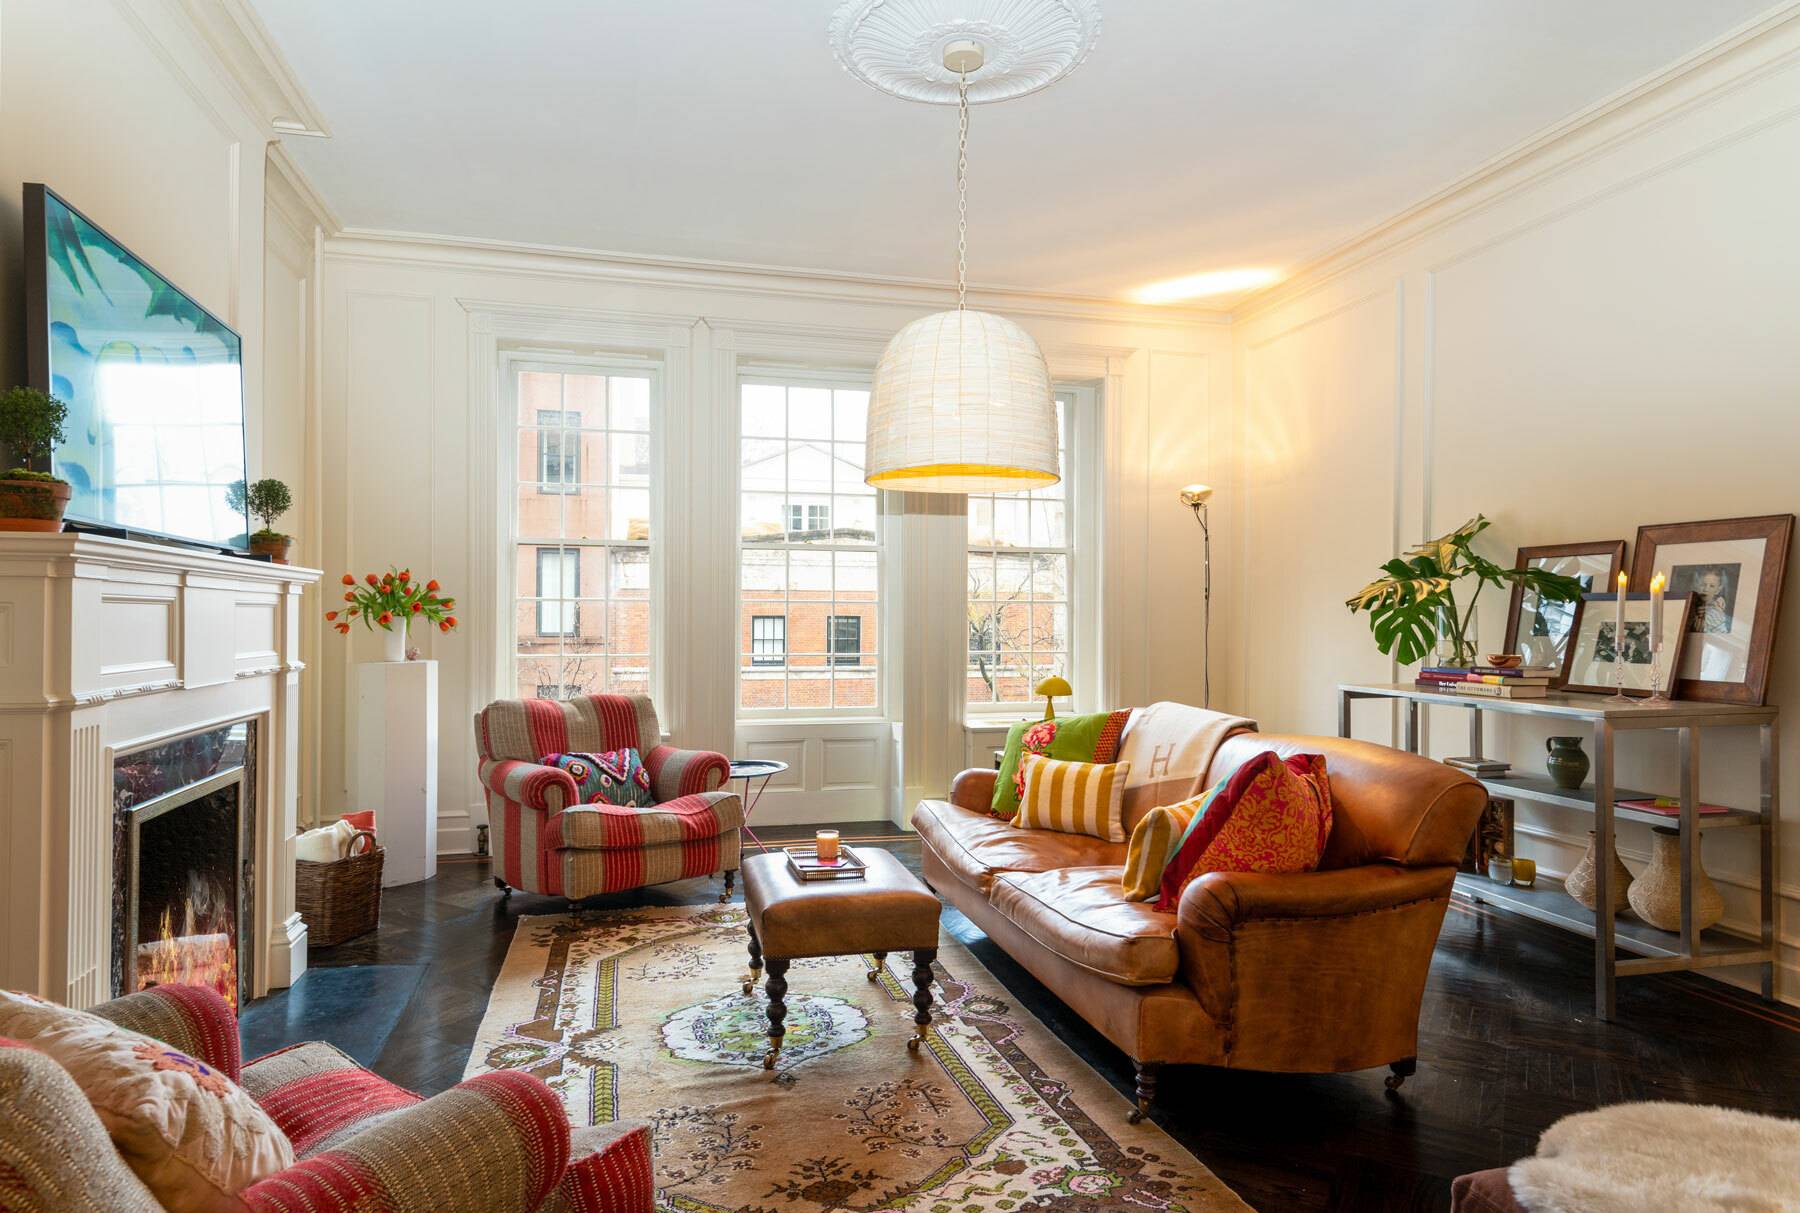 Elegant sophistication describes this impeccably thought out townhouse apartment.